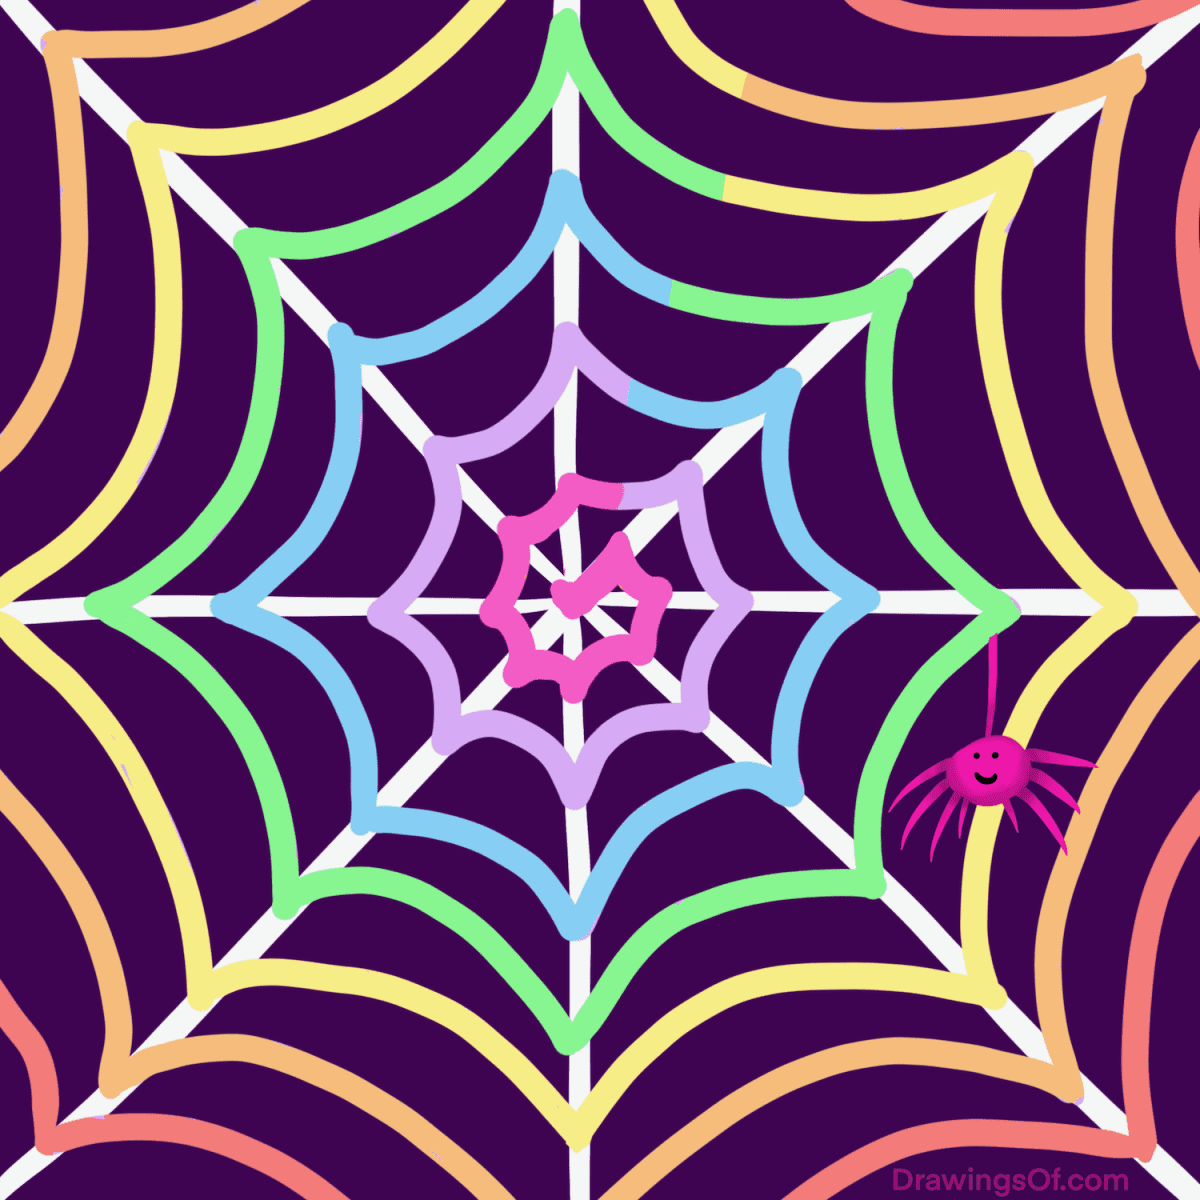 How to draw a spider web